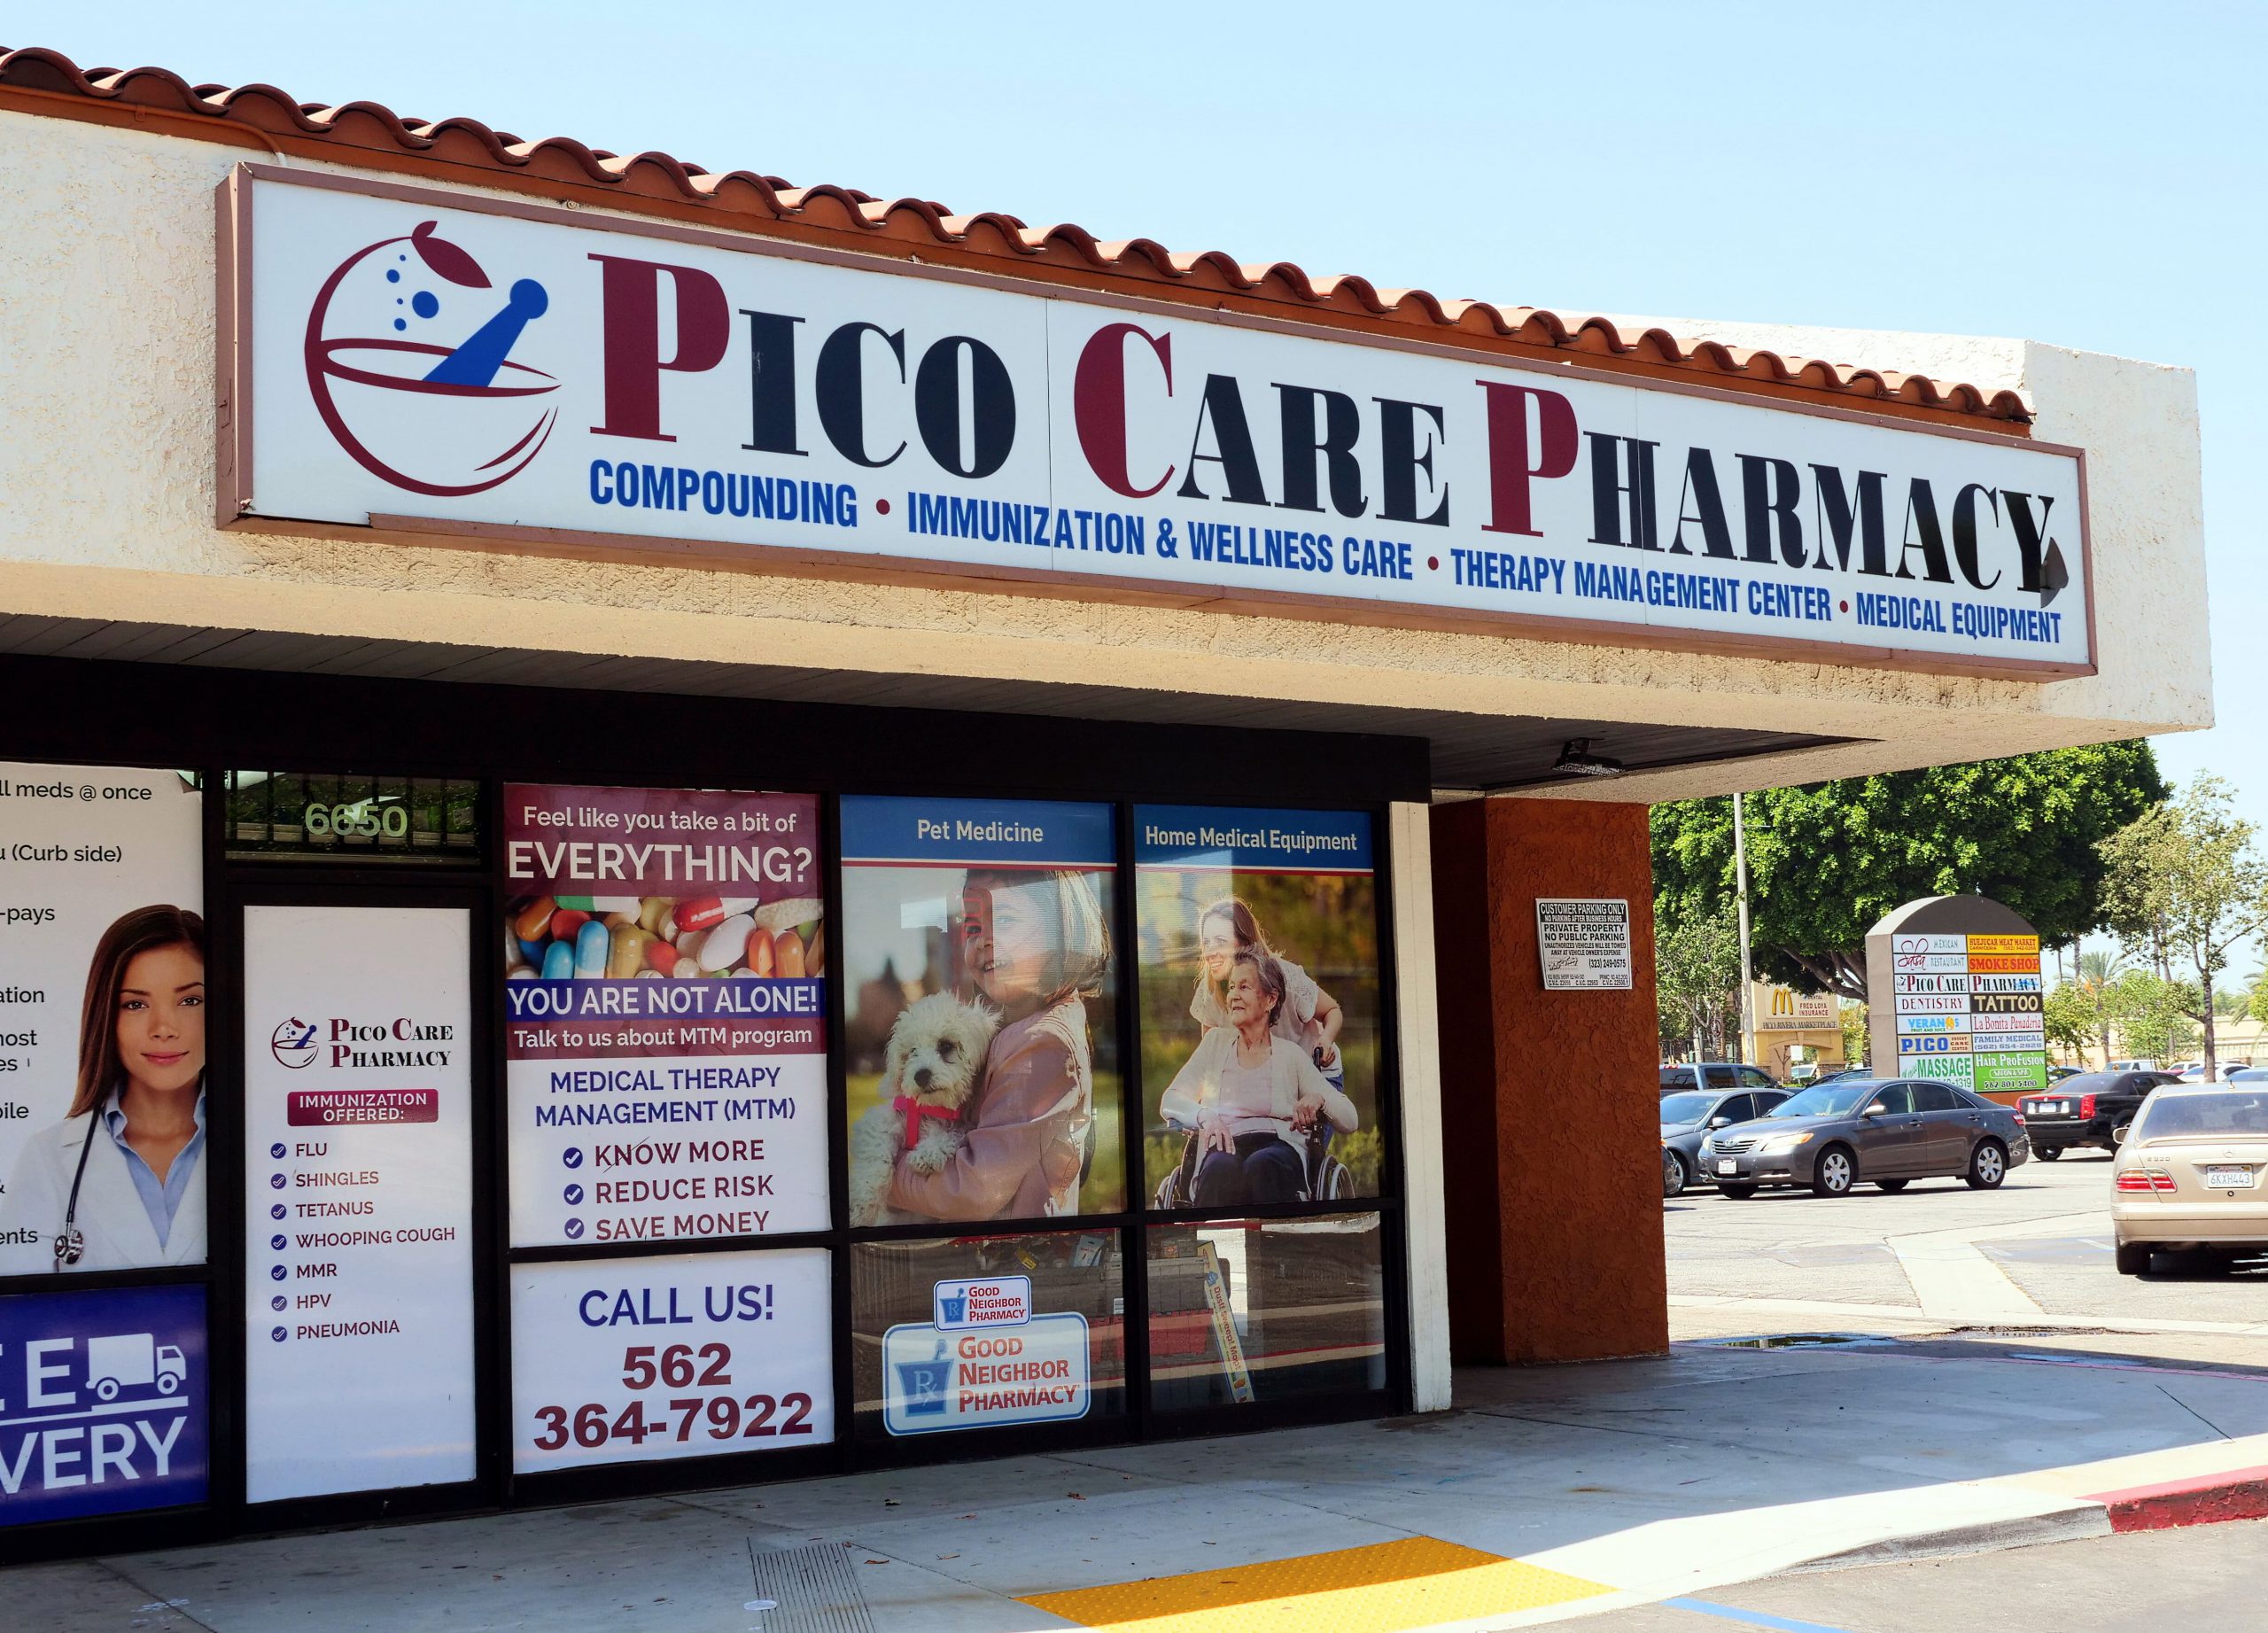 About The Staff of Pico Care Pharmacy